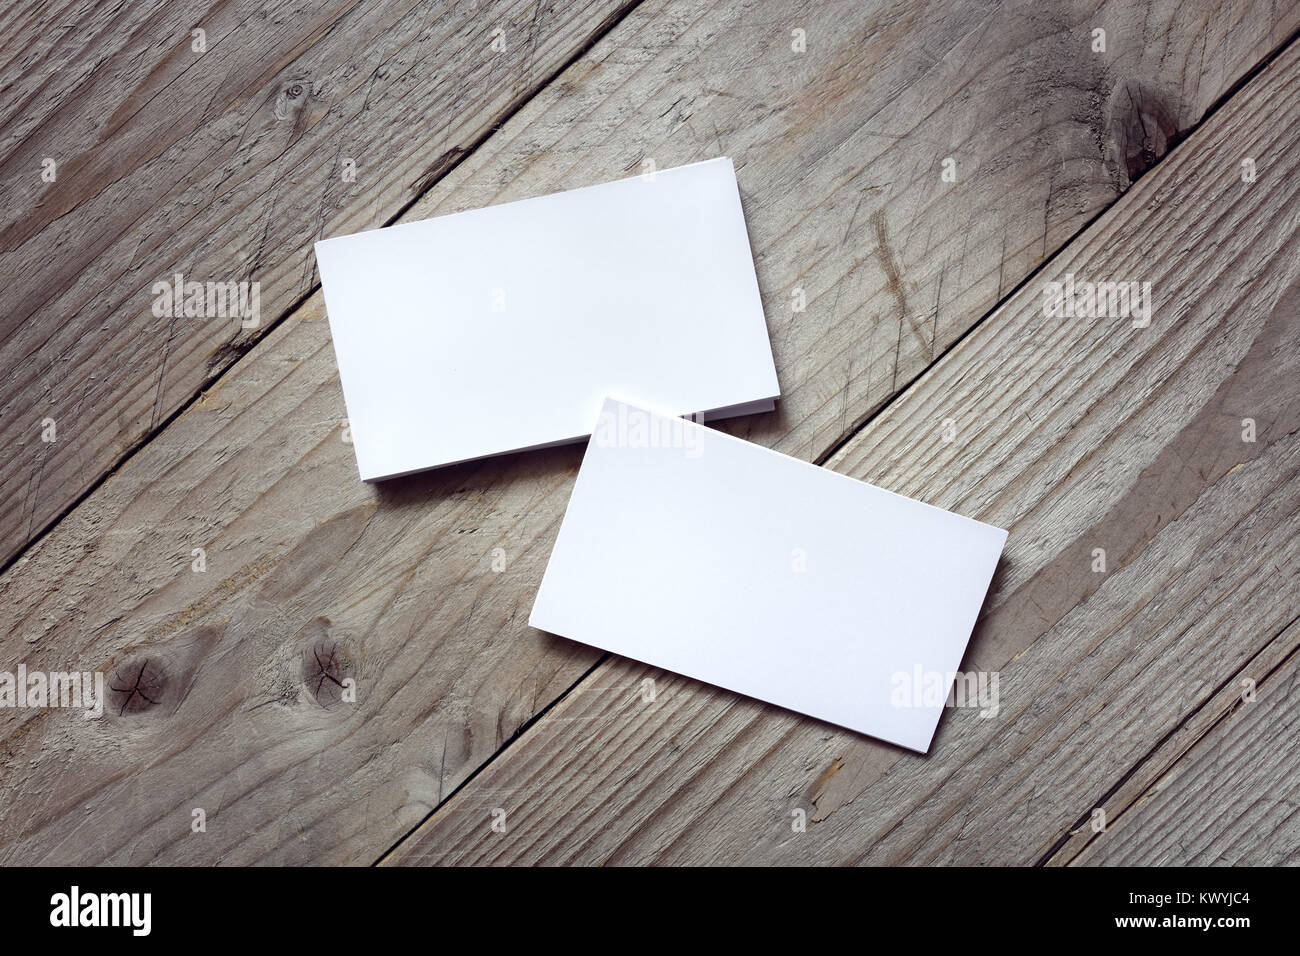 Business card template for branding identity on wood background Stock Photo